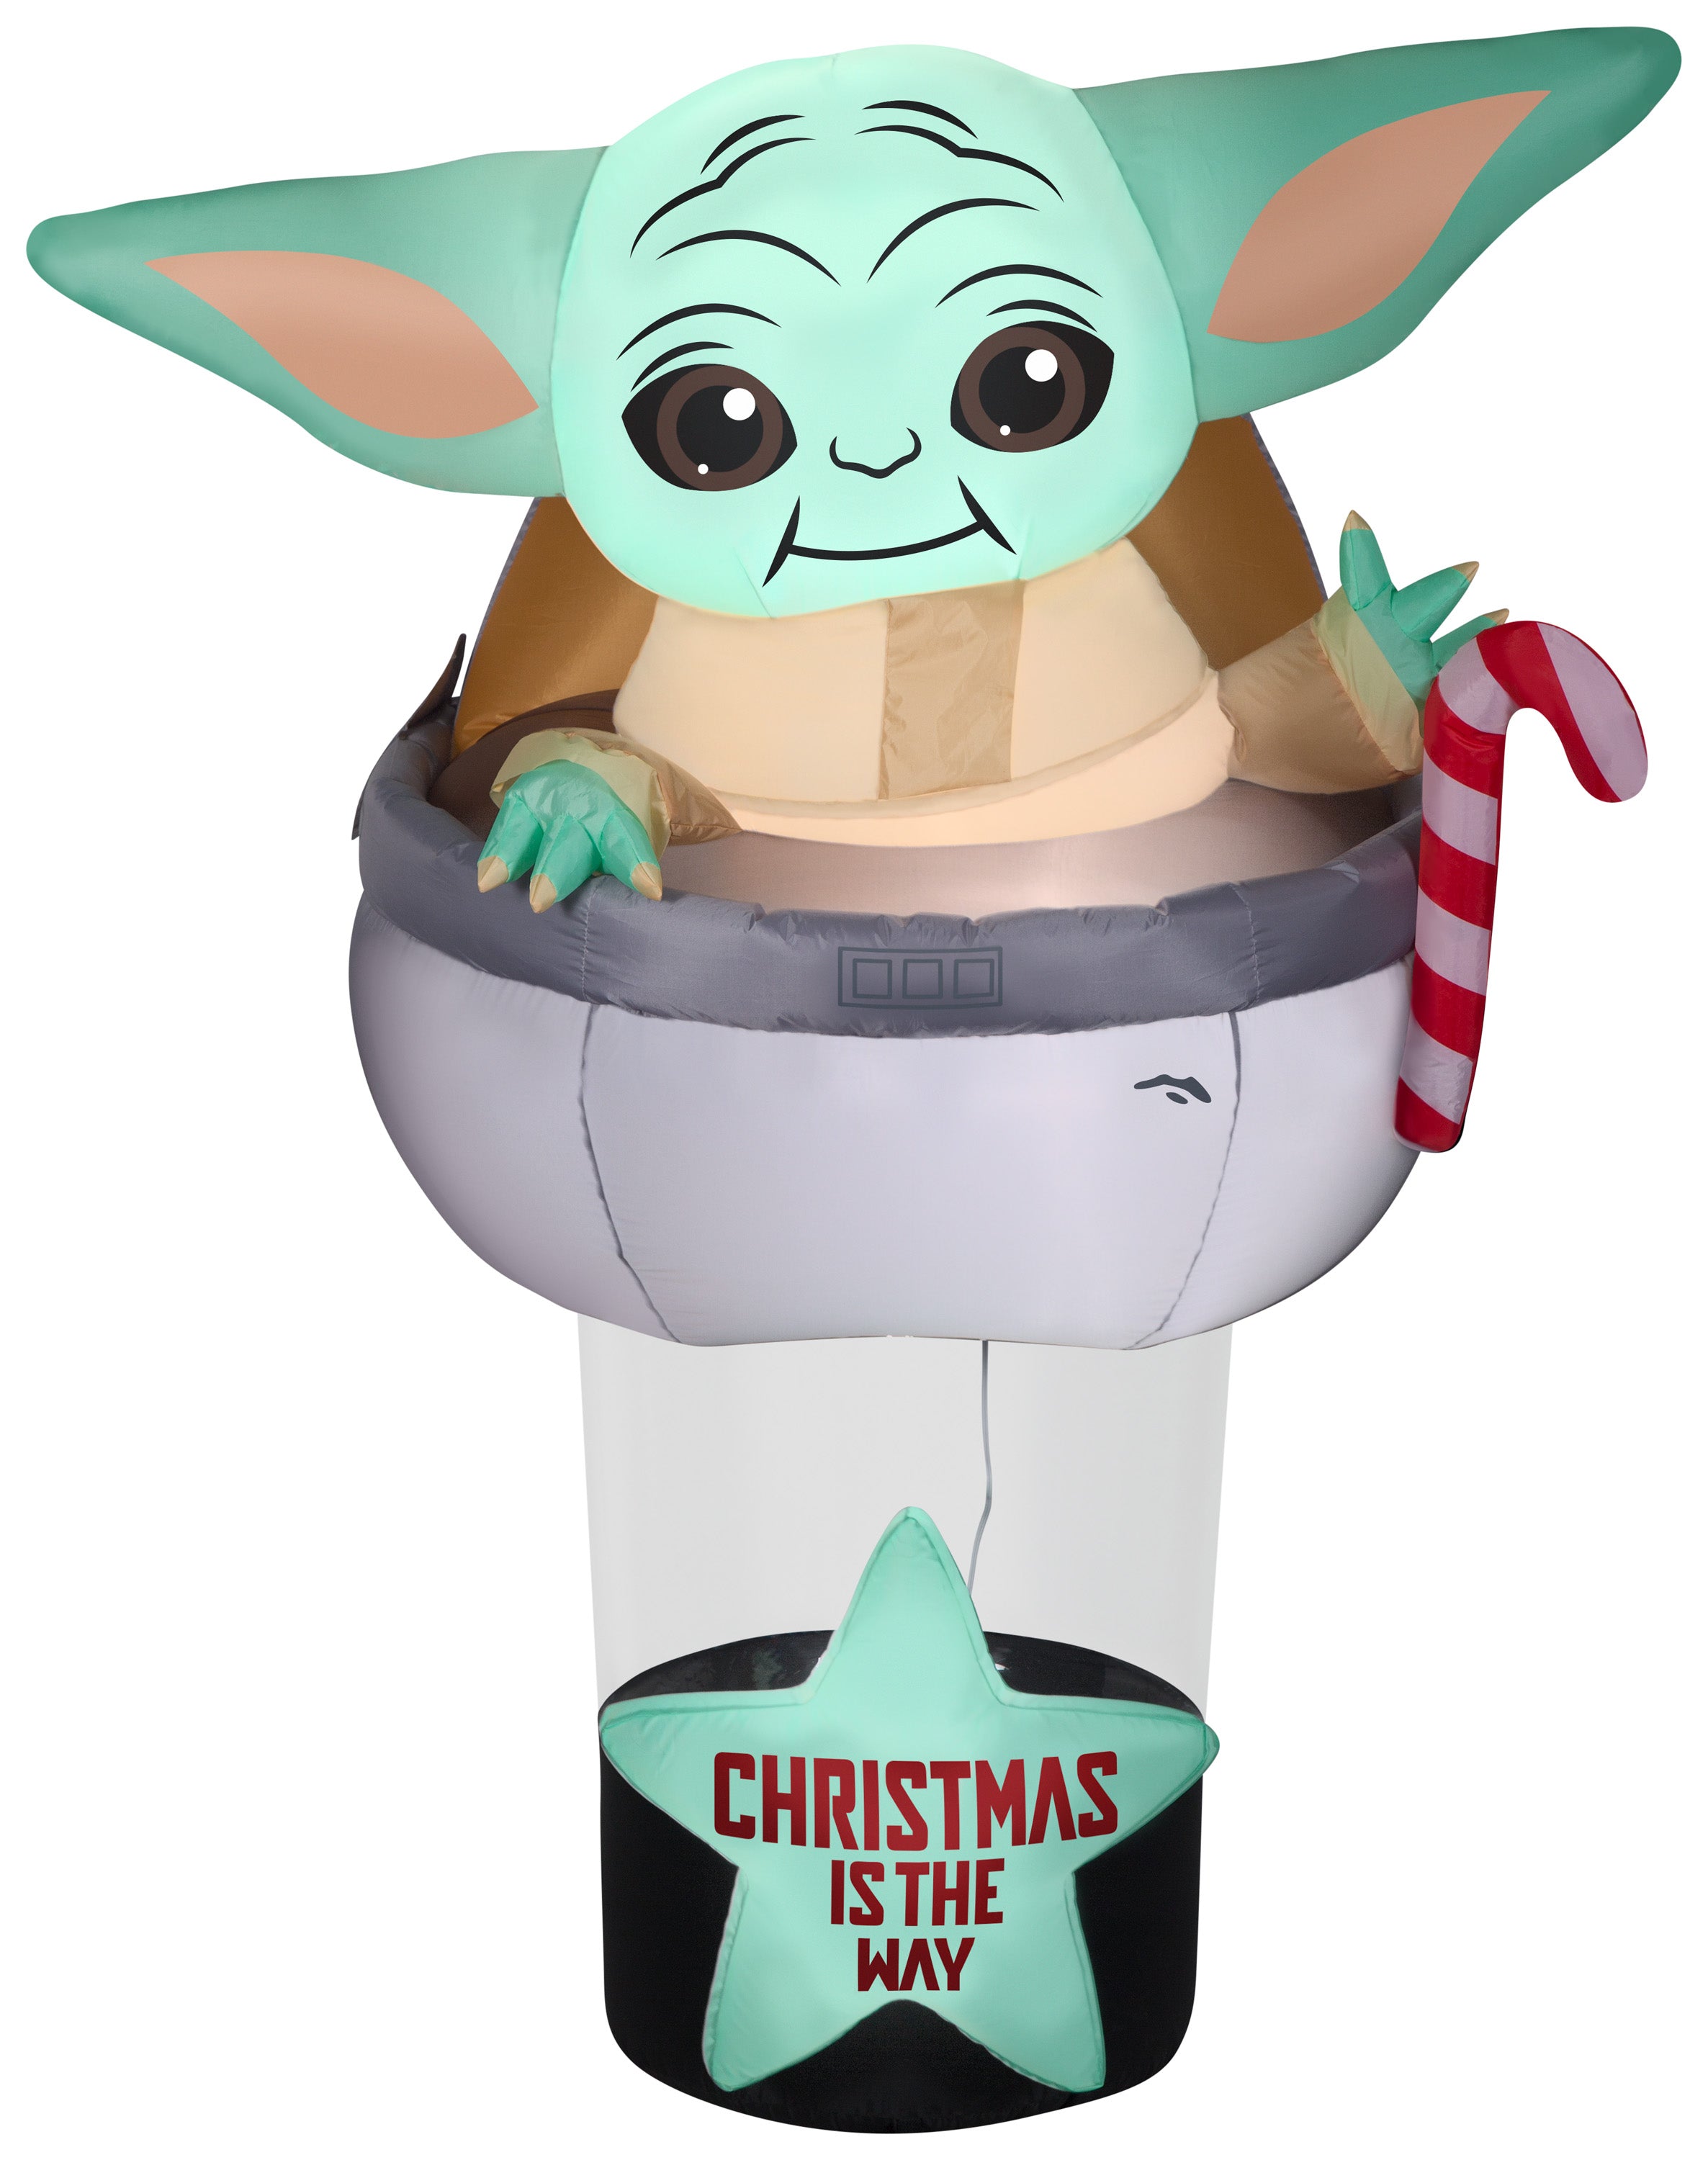 Gemmy Christmas Airblown Inflatable The Child in Pod Scene Star Wars, 6 ft Tall, grey